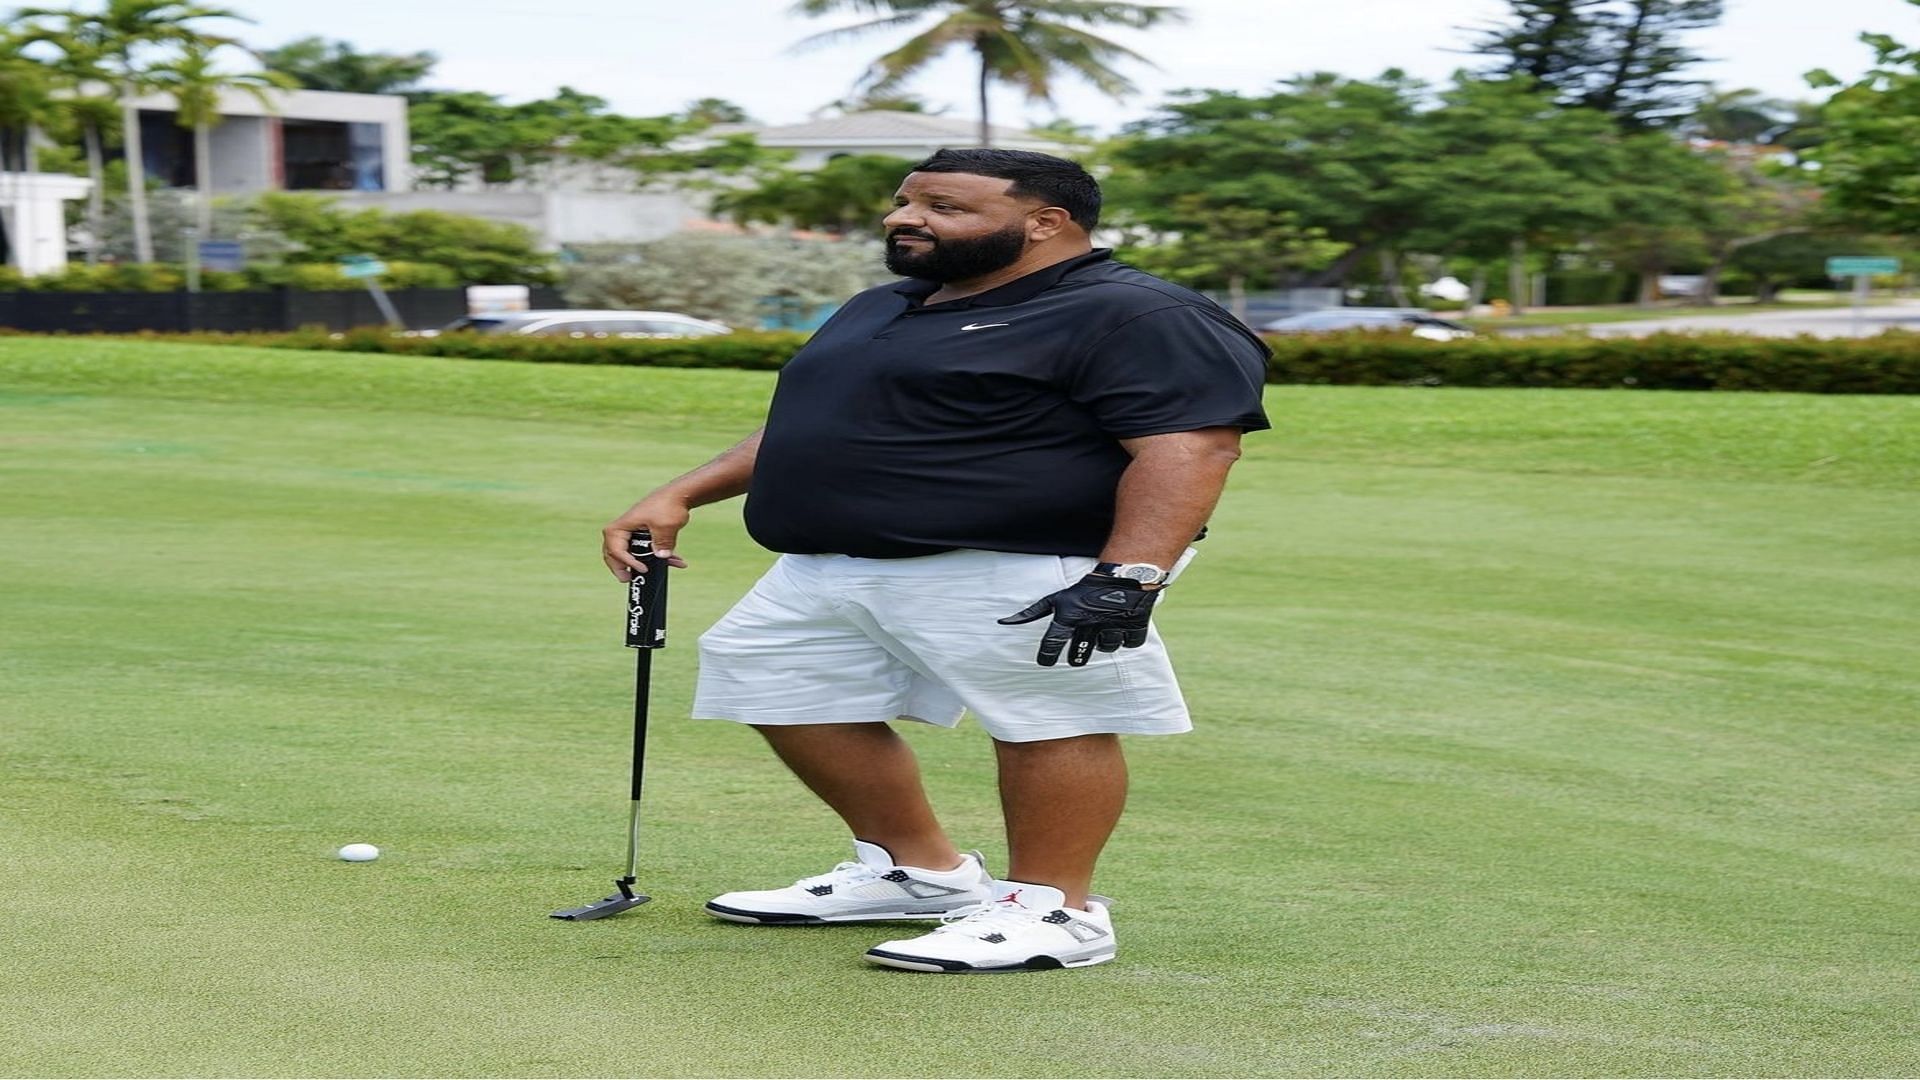 Let's go golfing! - DJ Khaled reveals his passion for Golf, which helped  him lose 15 lbs